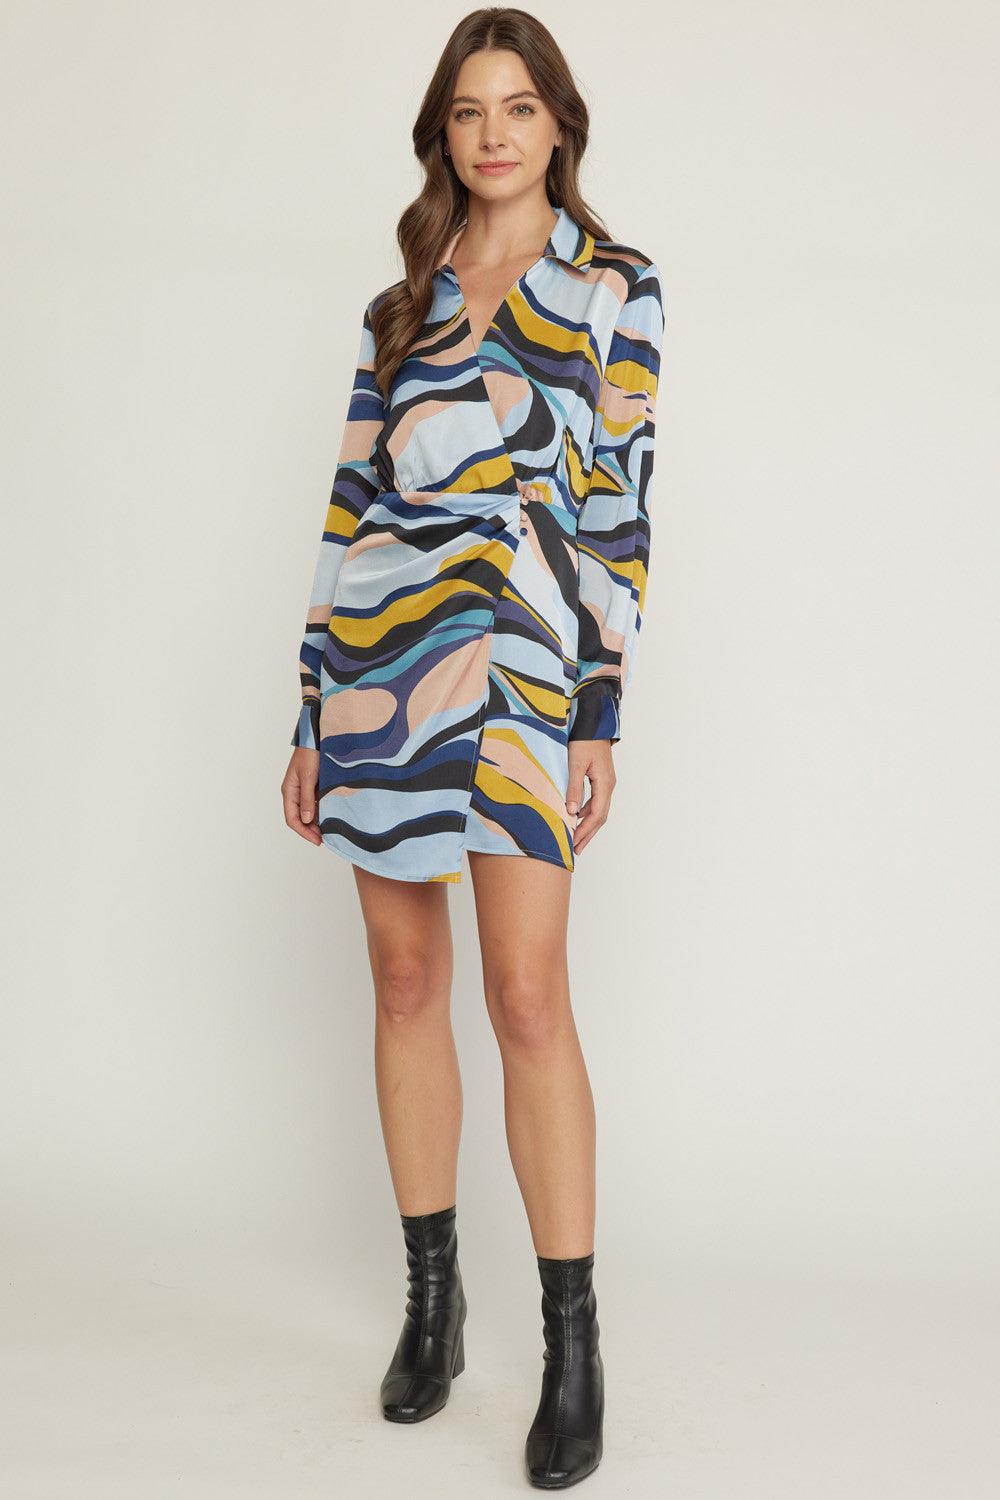 Swirl print collared v-neck wrap style mini dress - RK Collections Boutique